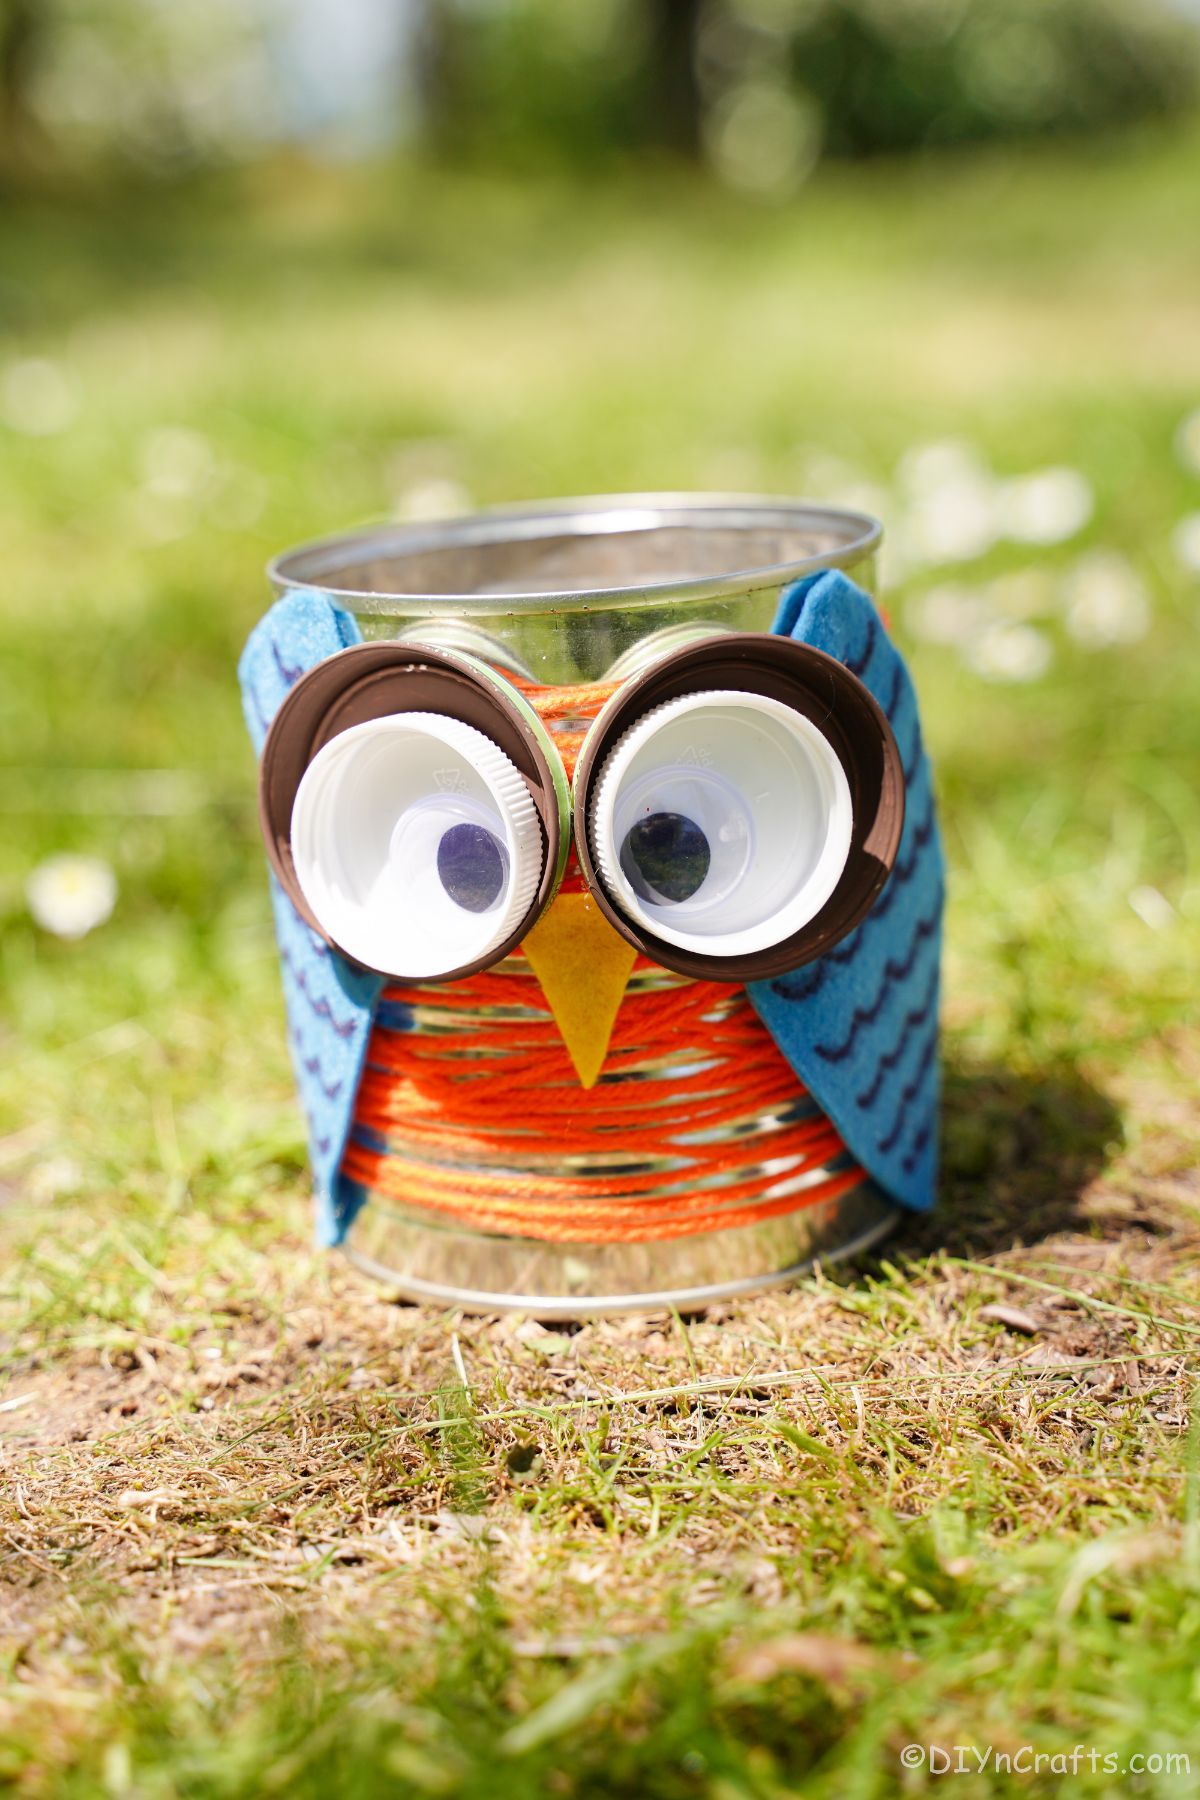 owl made of tin can on grass